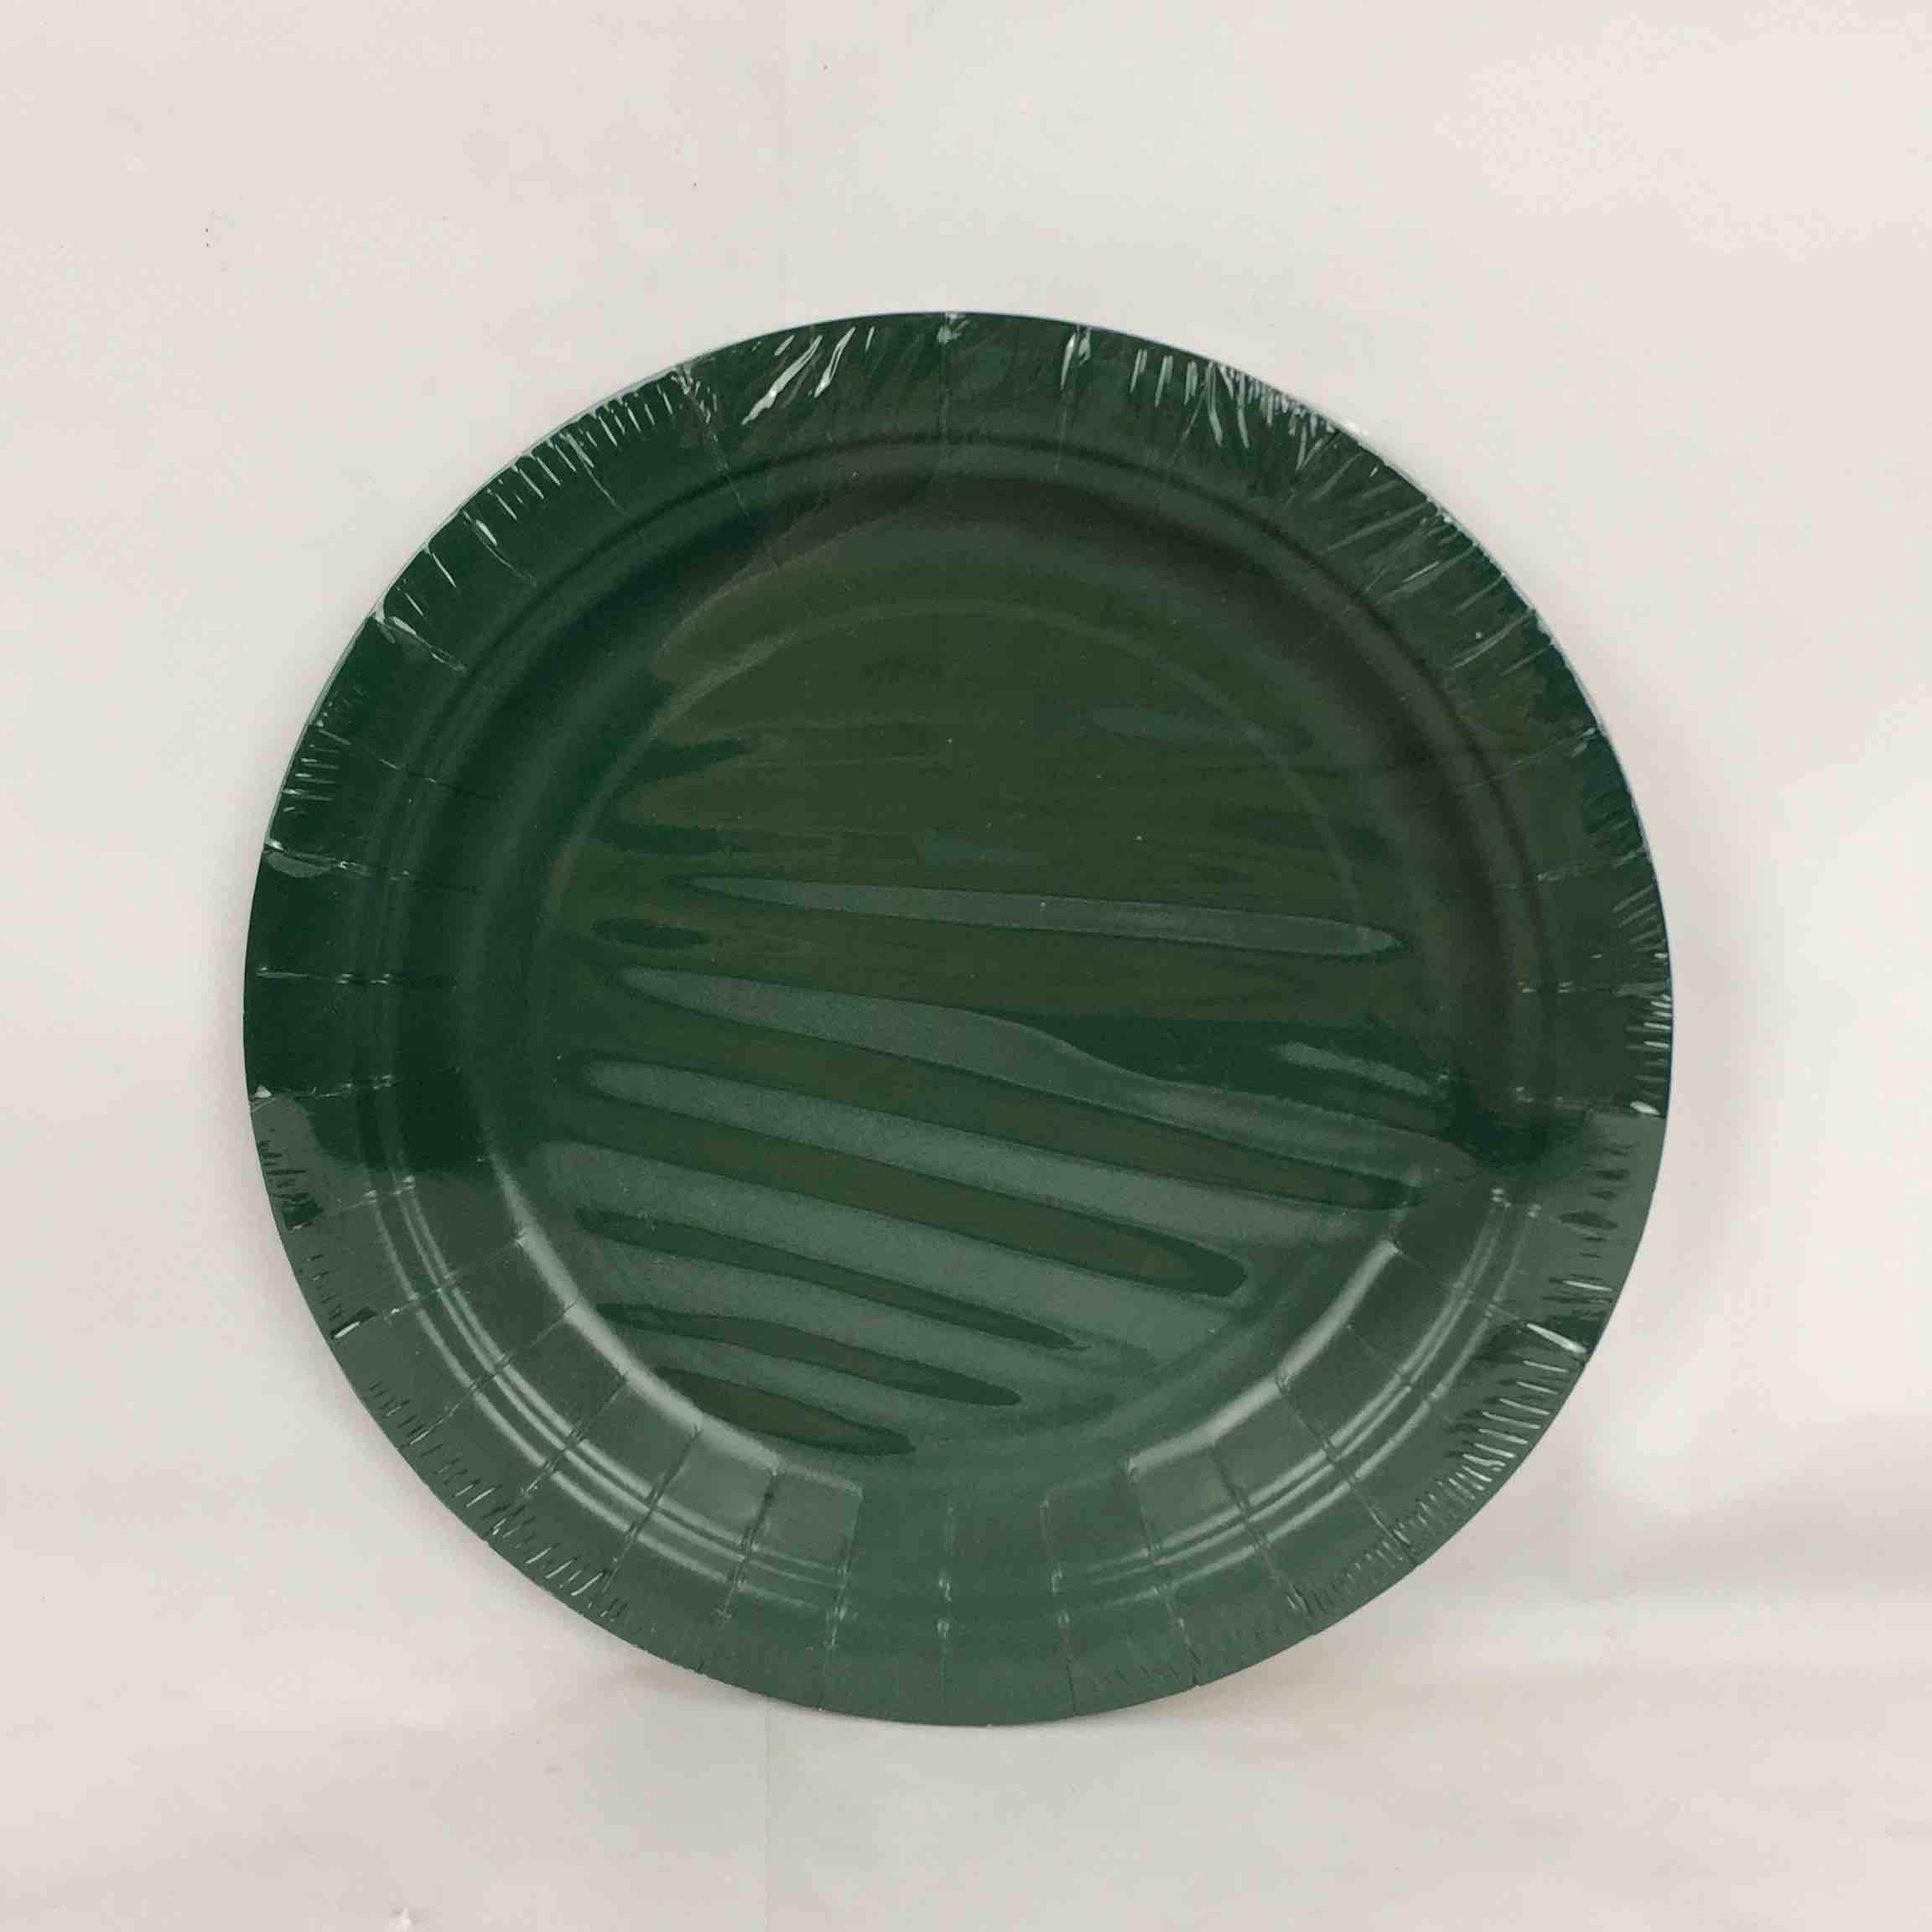 SOLID HUNT GREEN PLATES 7in  8pcs